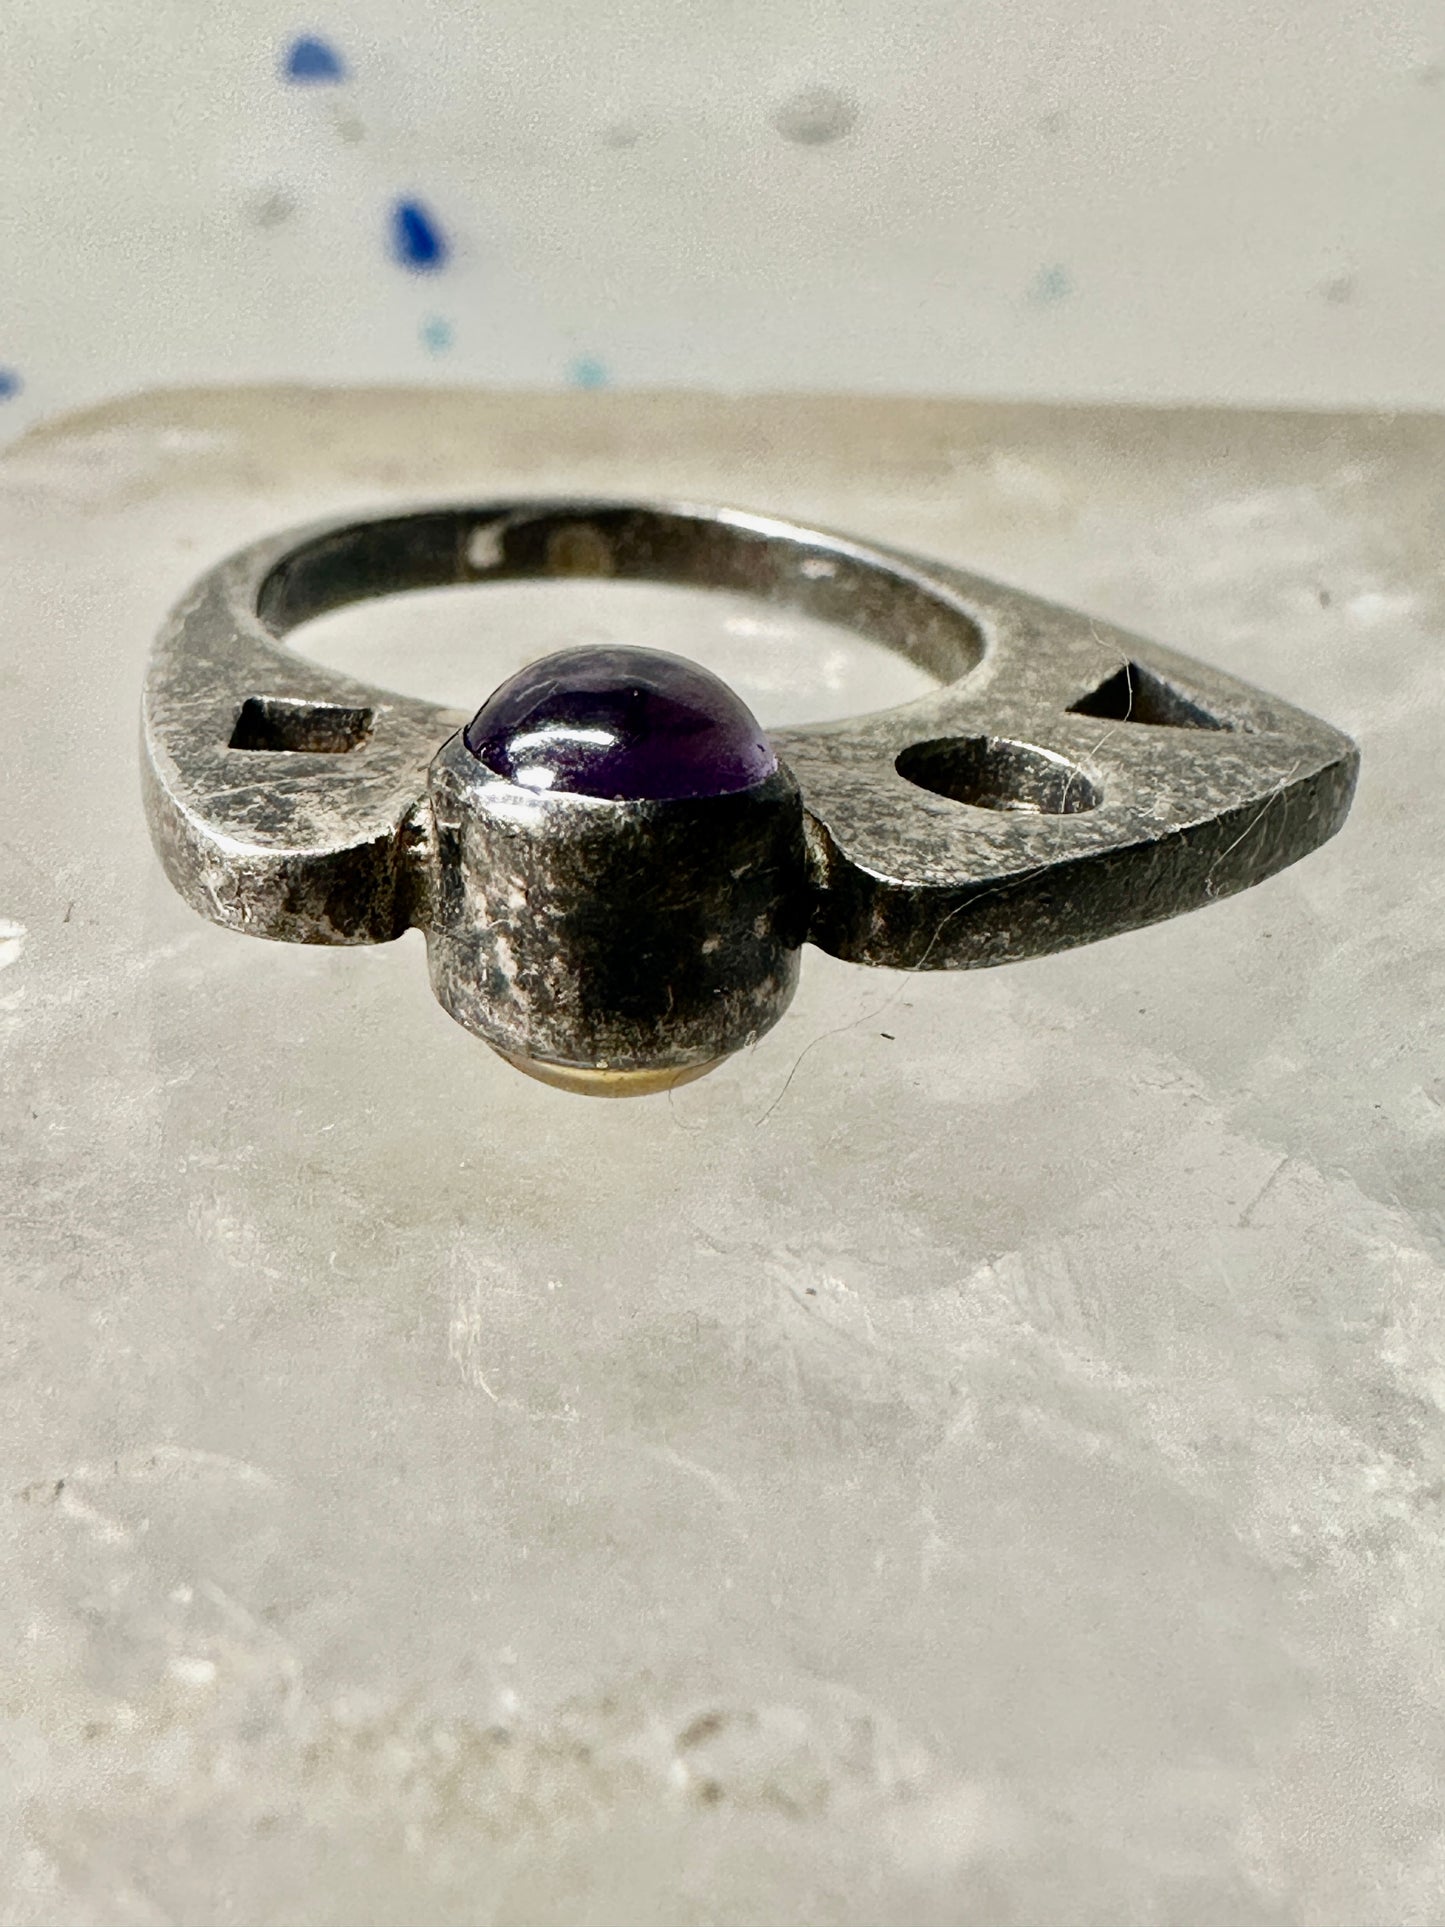 Reversible ring amethyst citrine modern abstract steampunk band size 5.50 sterling silver women girls